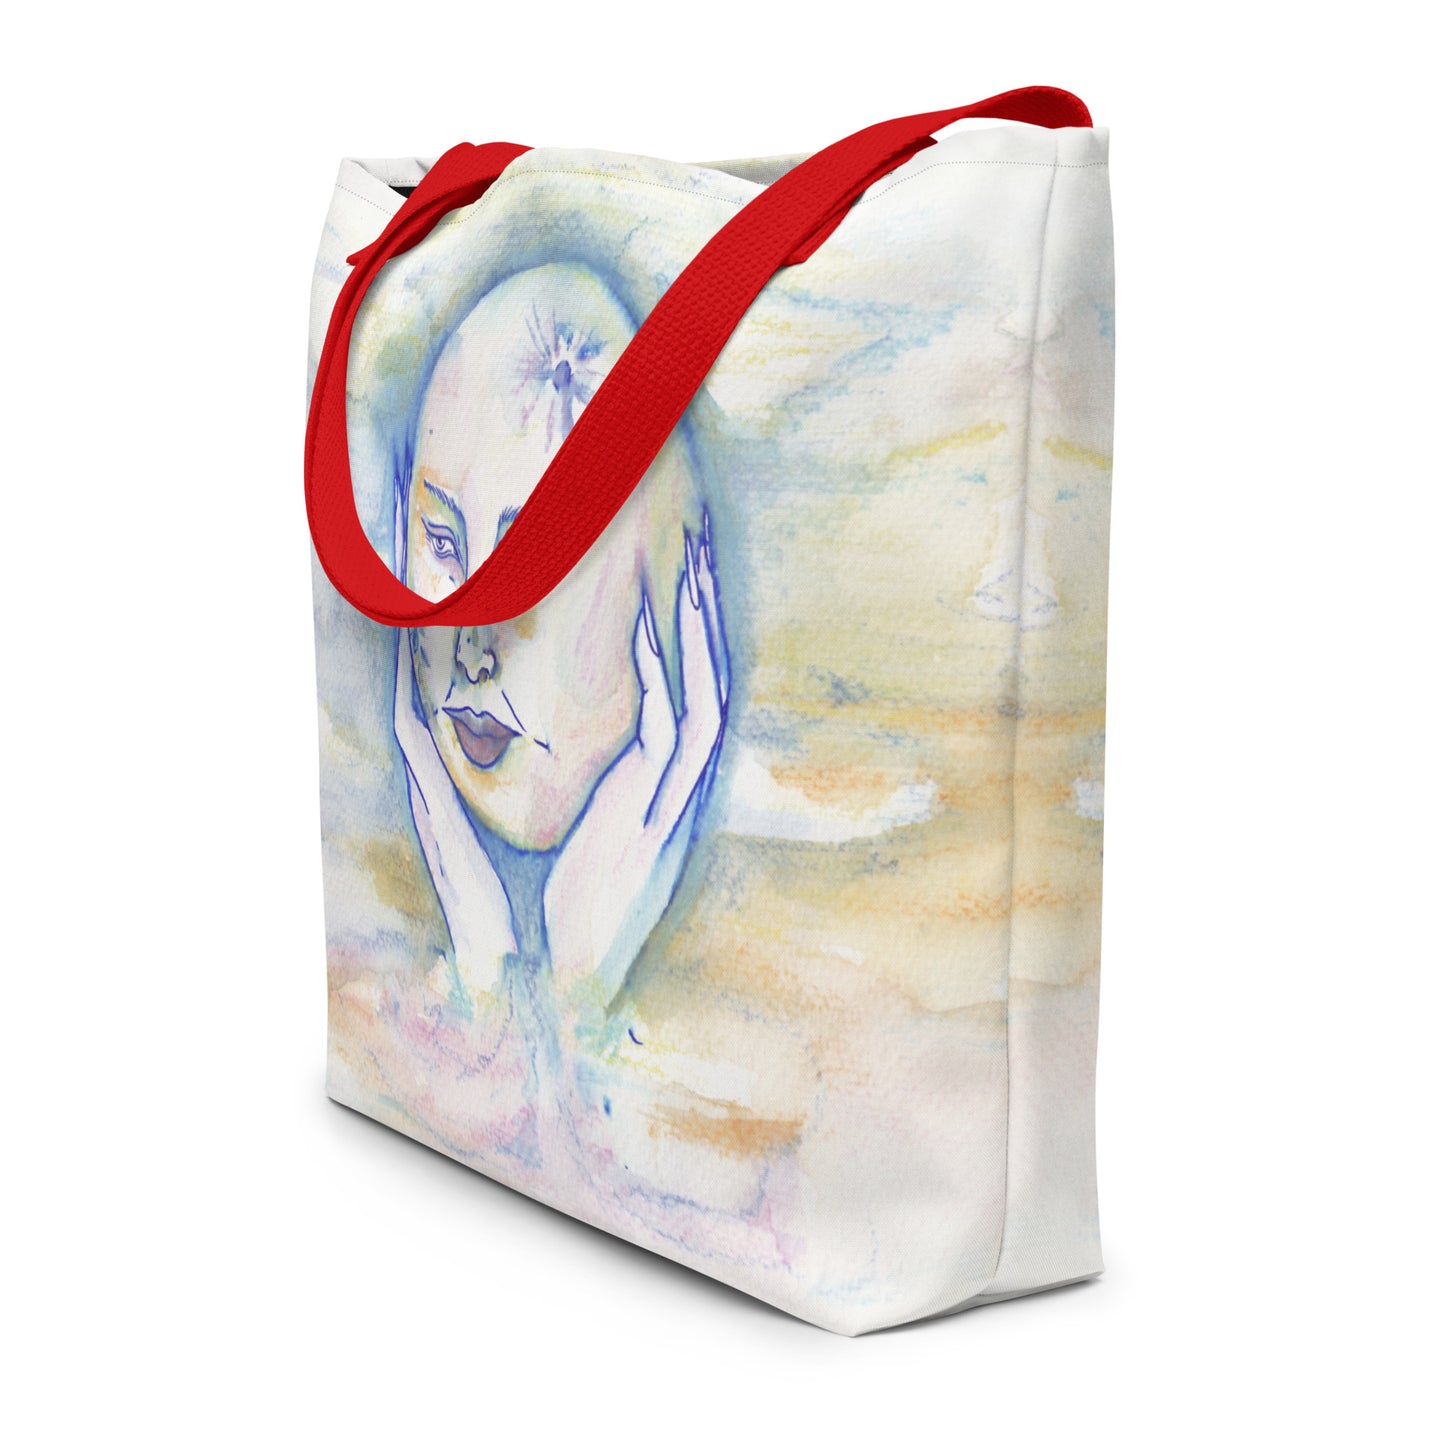 " Lady Moon " Watercolour All-Over Print Large Tote Bag